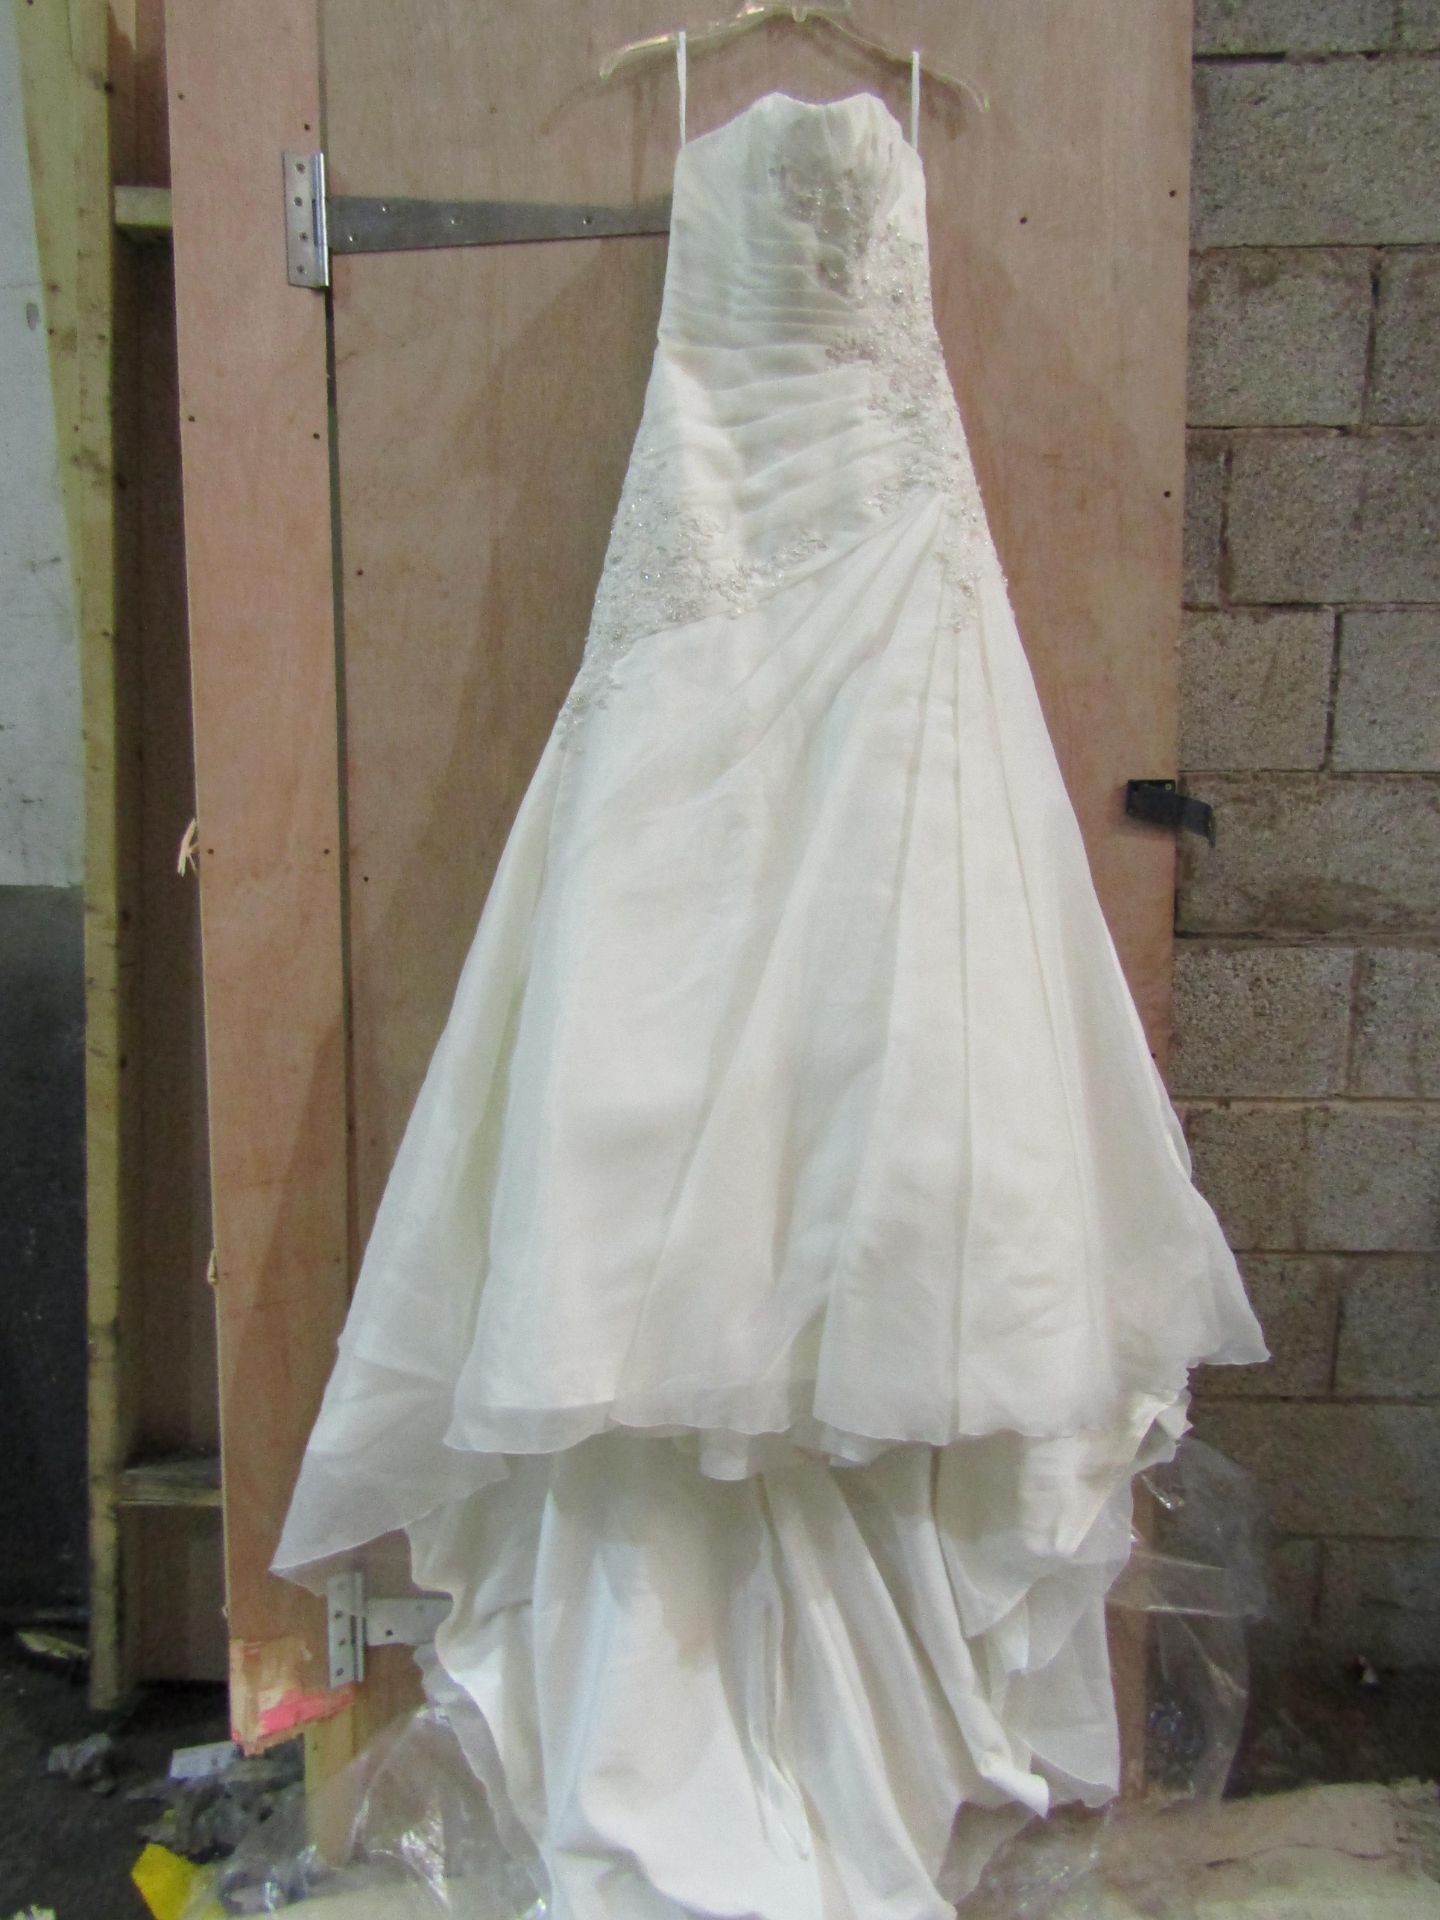 Approx 500 pieces of wedding shop stock to include wedding dresses, mother of the bride, dresses, - Image 84 of 108